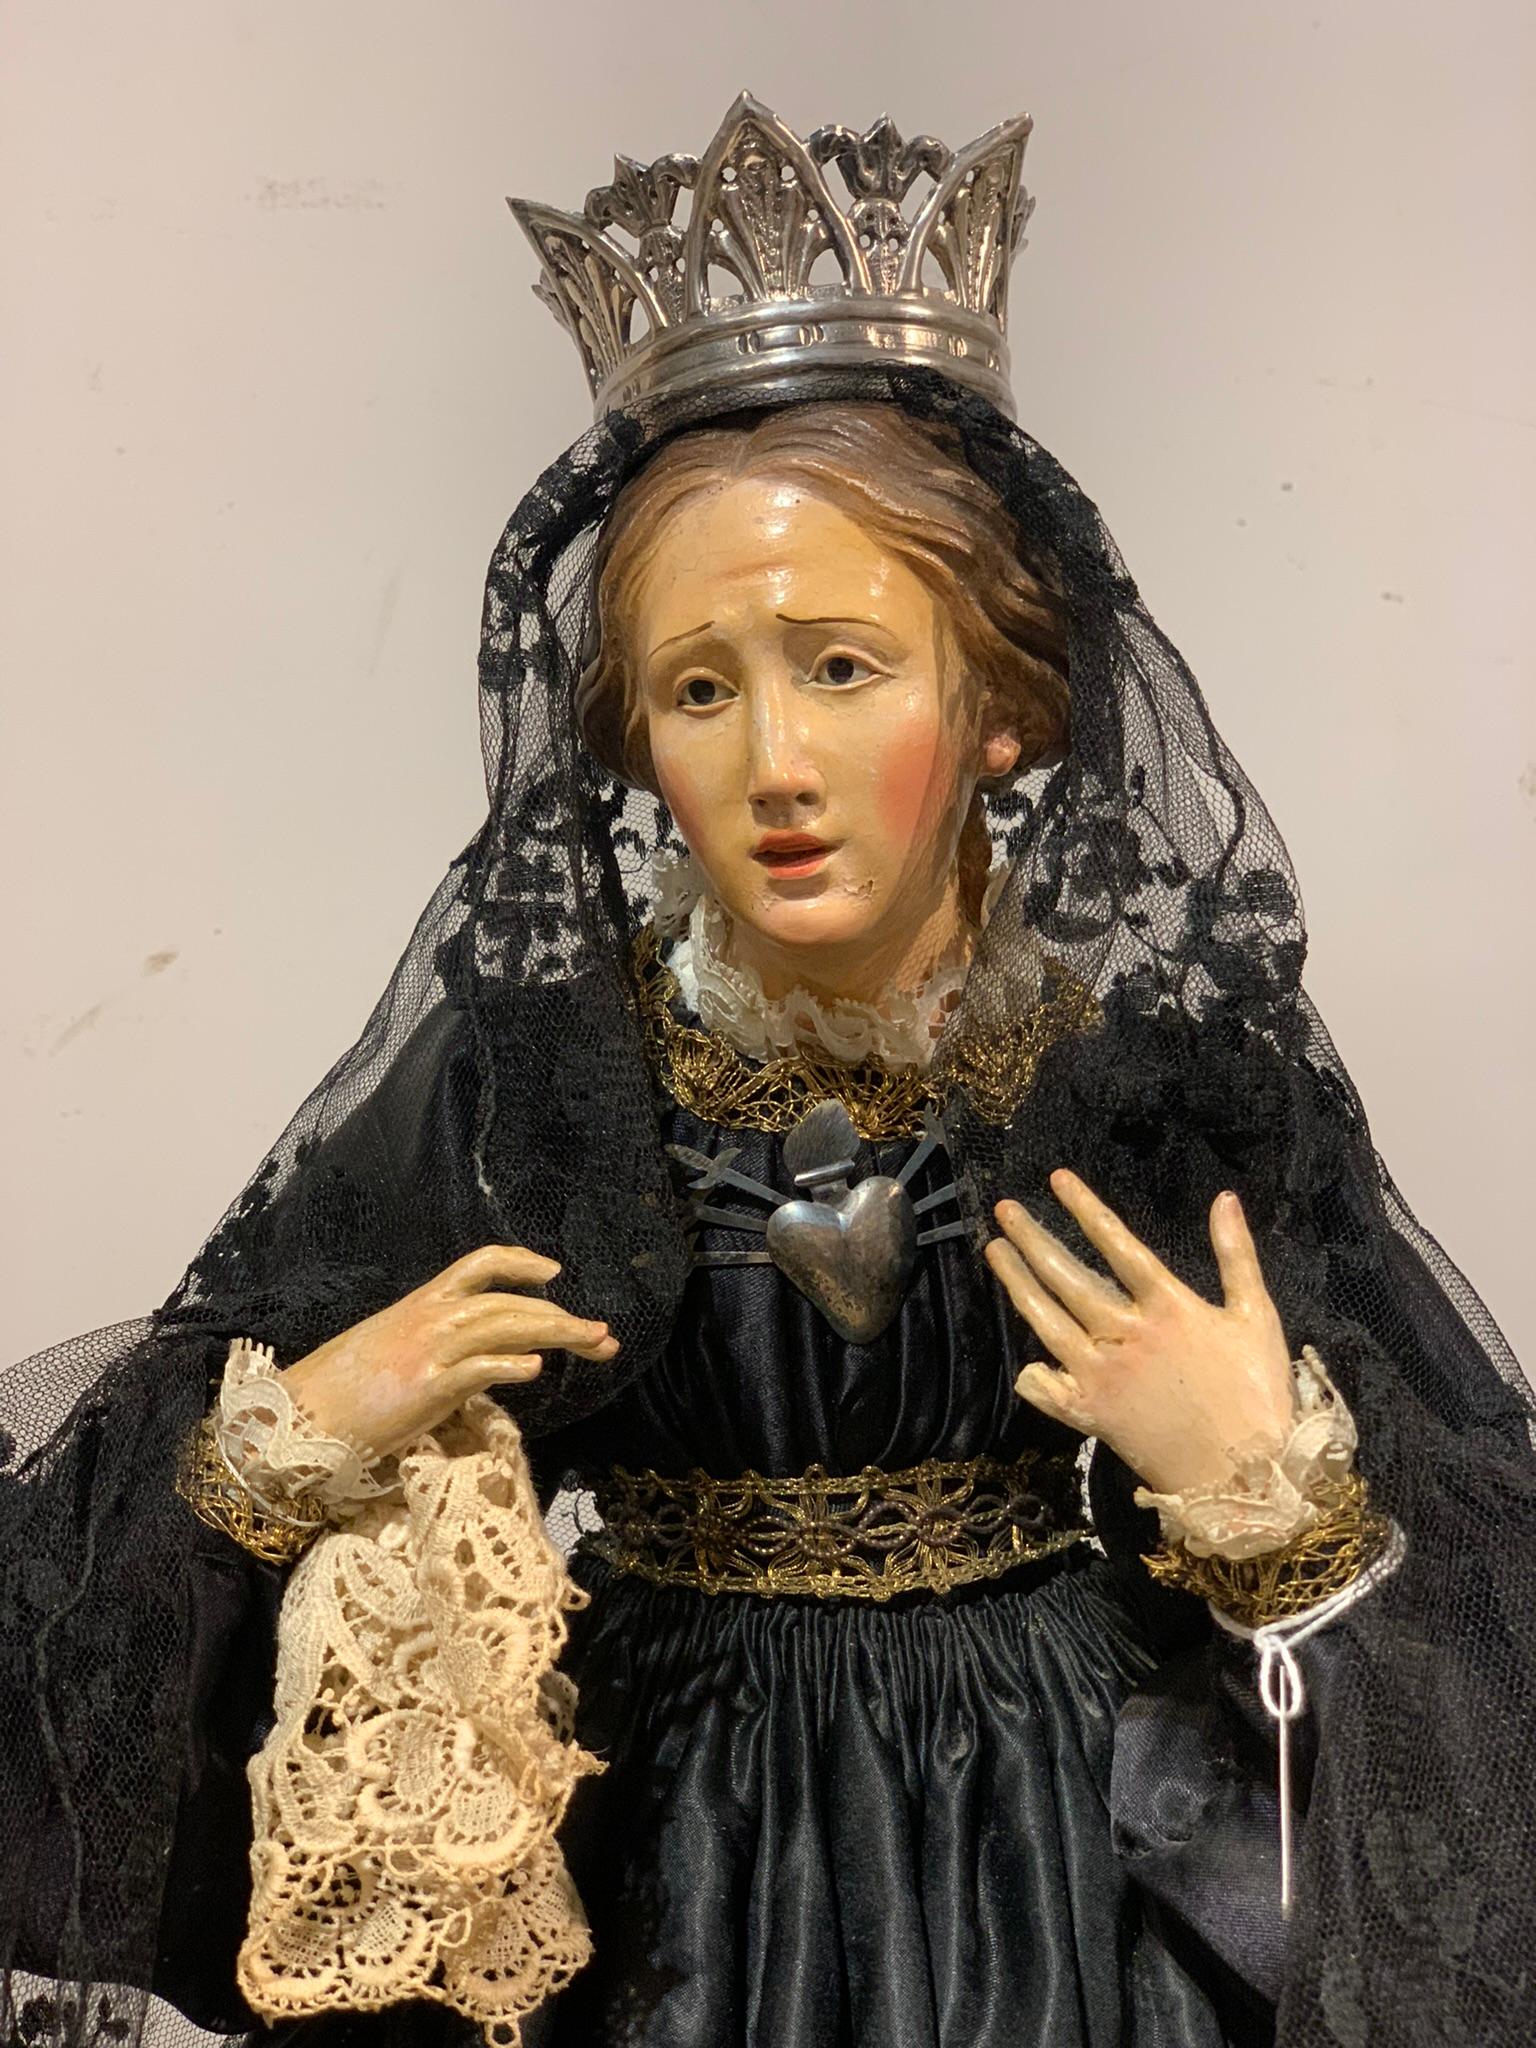 Sculpture depicting Madonna in black silk dress with lace headdress. The figure is in wood covered by fabric clothes, the head and hands are in polychrome terracotta.
The sculpture is completed by a silver heart-shaped crown and tiara on the chest.